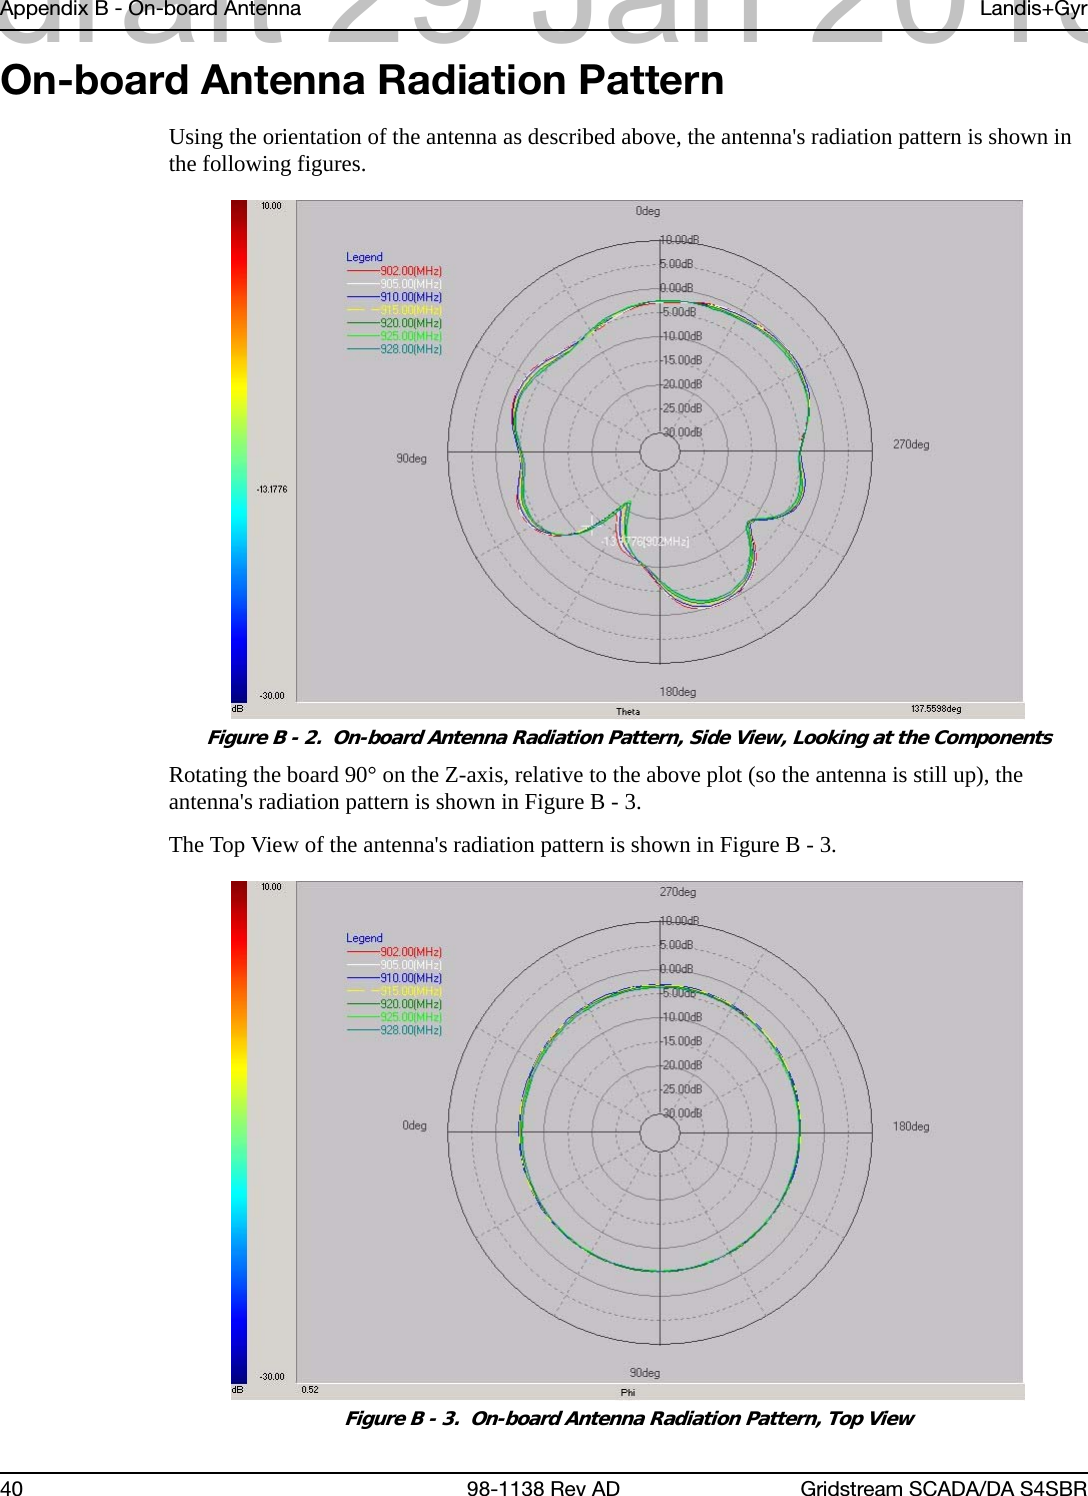 Appendix B - On-board Antenna Landis+Gyr40 98-1138 Rev AD Gridstream SCADA/DA S4SBROn-board Antenna Radiation PatternUsing the orientation of the antenna as described above, the antenna&apos;s radiation pattern is shown in the following figures.Figure B - 2.  On-board Antenna Radiation Pattern, Side View, Looking at the ComponentsRotating the board 90° on the Z-axis, relative to the above plot (so the antenna is still up), the antenna&apos;s radiation pattern is shown in Figure B - 3.The Top View of the antenna&apos;s radiation pattern is shown in Figure B - 3.Figure B - 3.  On-board Antenna Radiation Pattern, Top Viewdraft 29 Jan 2013